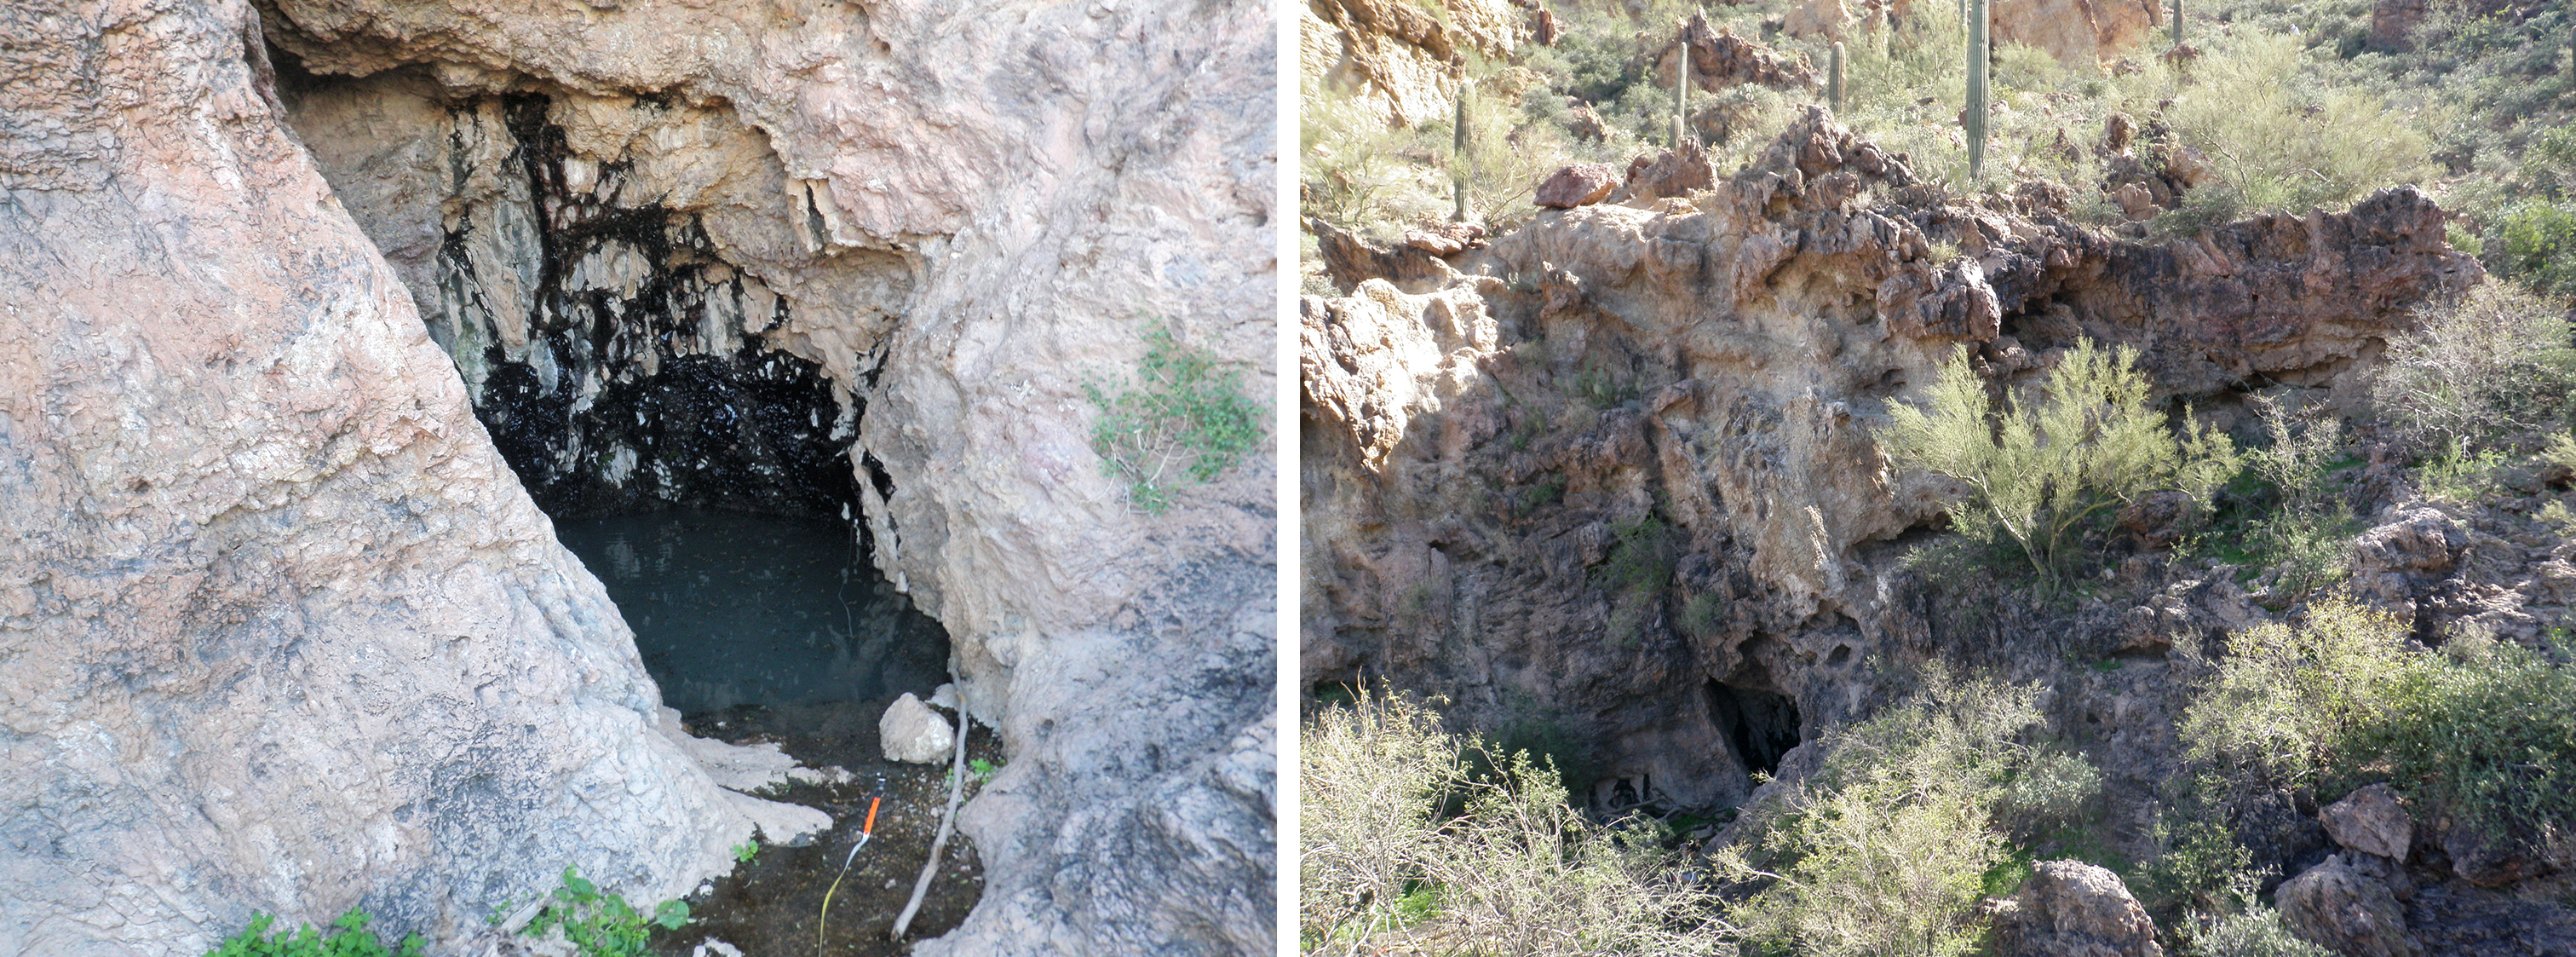 Two photos. At left, desert cliff with black wash where water seeps into small pool at base, where monitoring equipment sits. At right, view of same area from above.